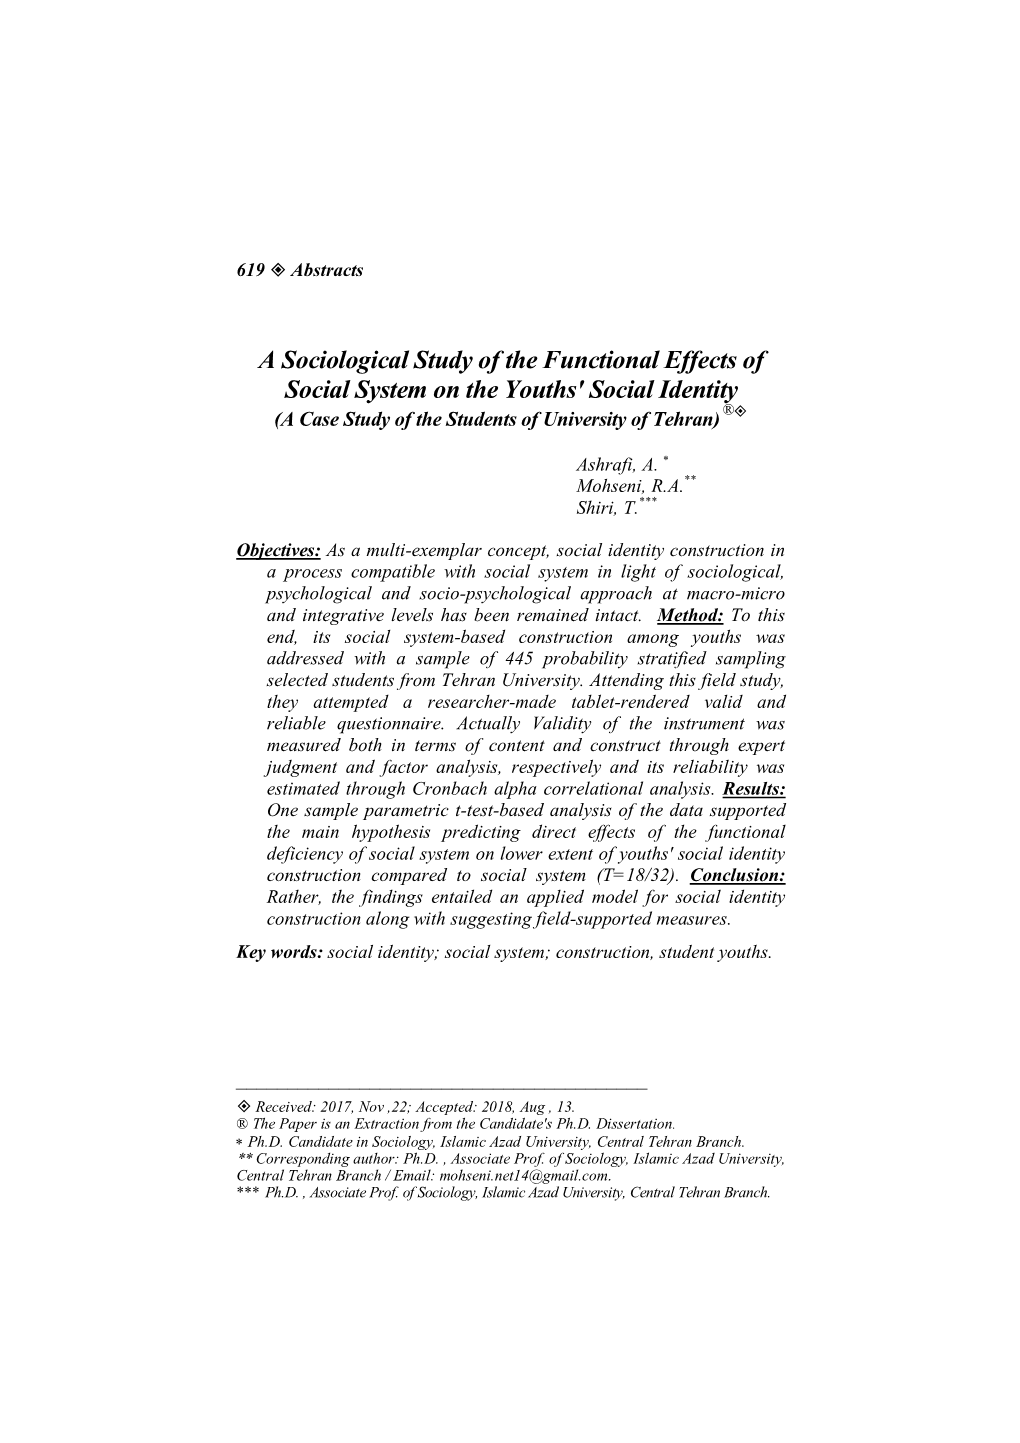 A Sociological Study of the Functional Effects of Social System on the Youths' Social Identity